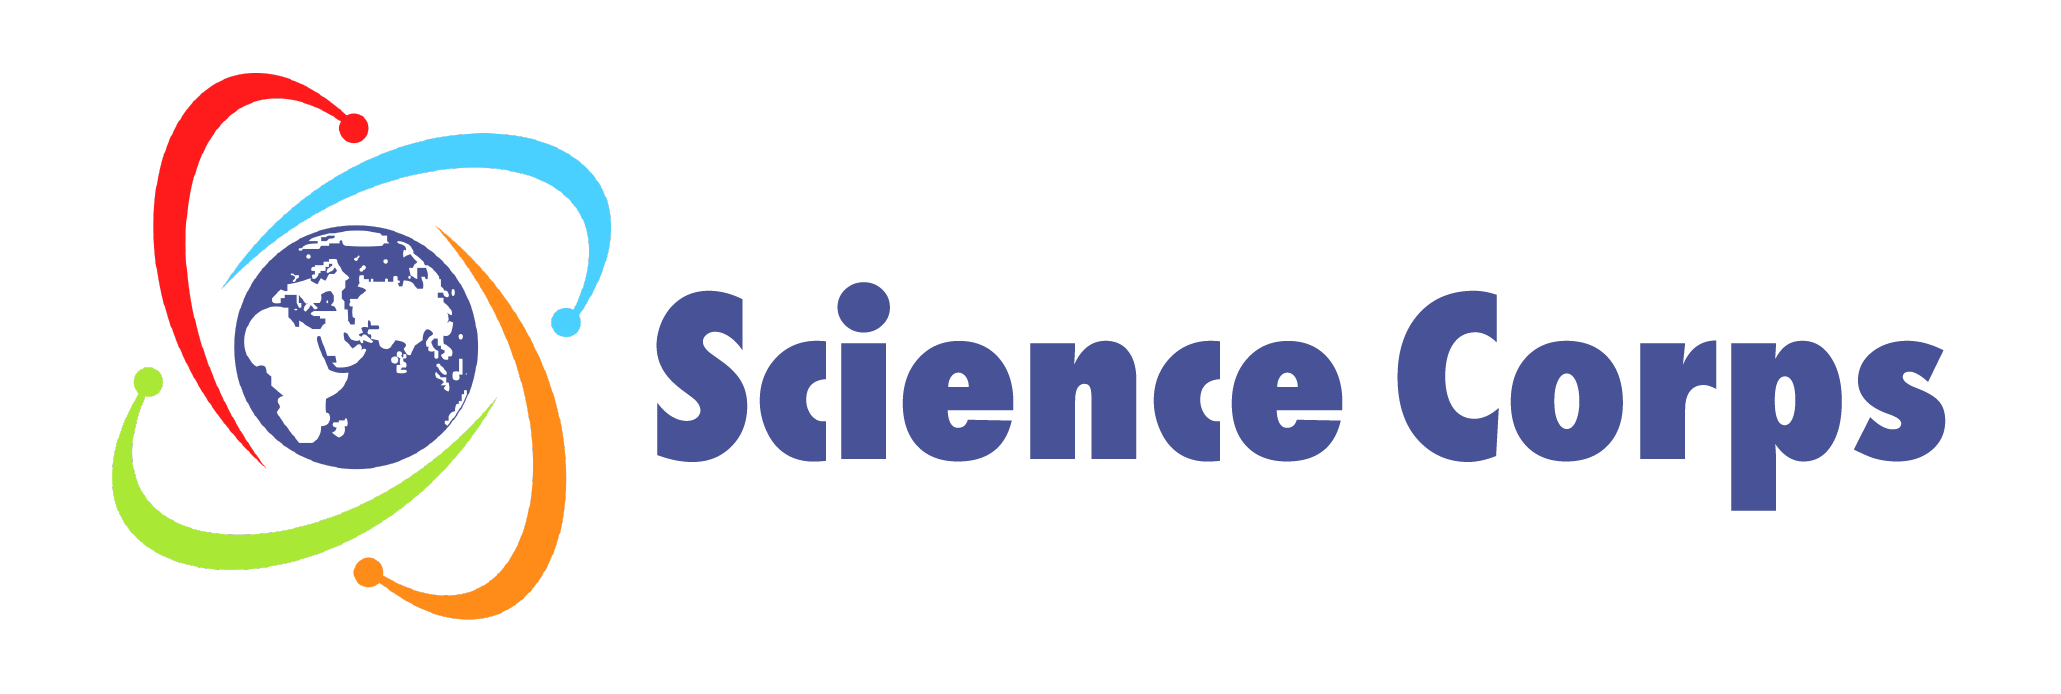 science corps logo